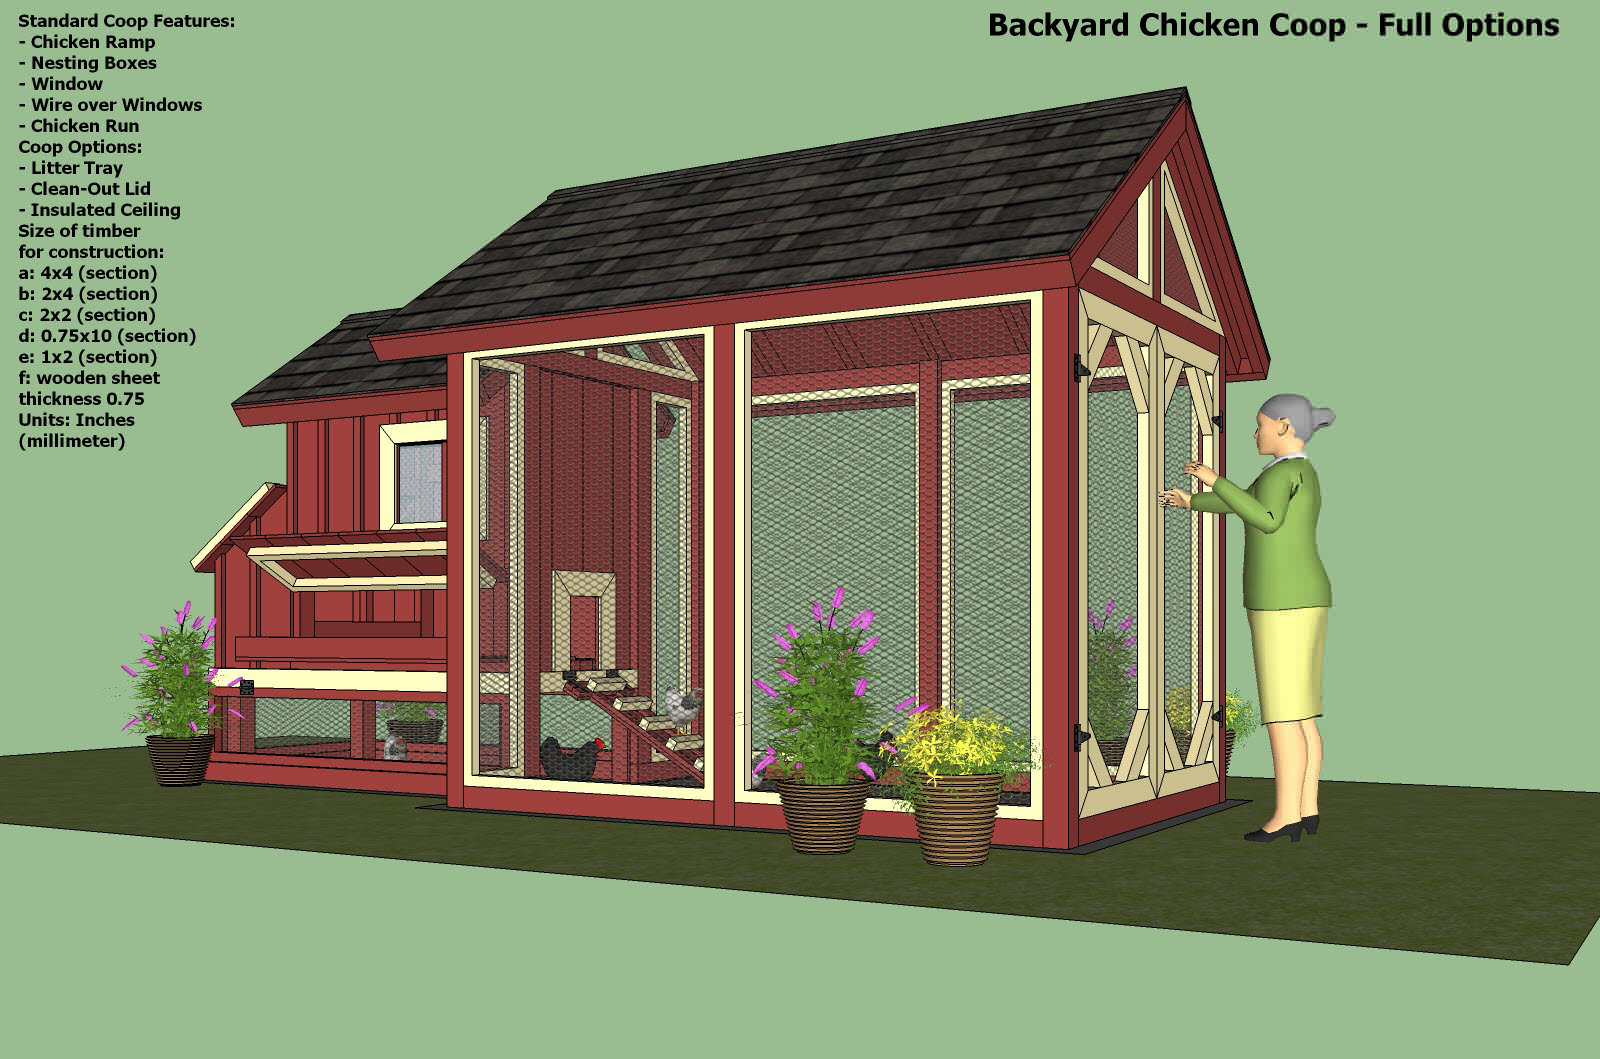 How To Build A Chicken Coop: Plans To Build A Chicken Coop - How To Make A Chicken Coop Chicken Coop Plans